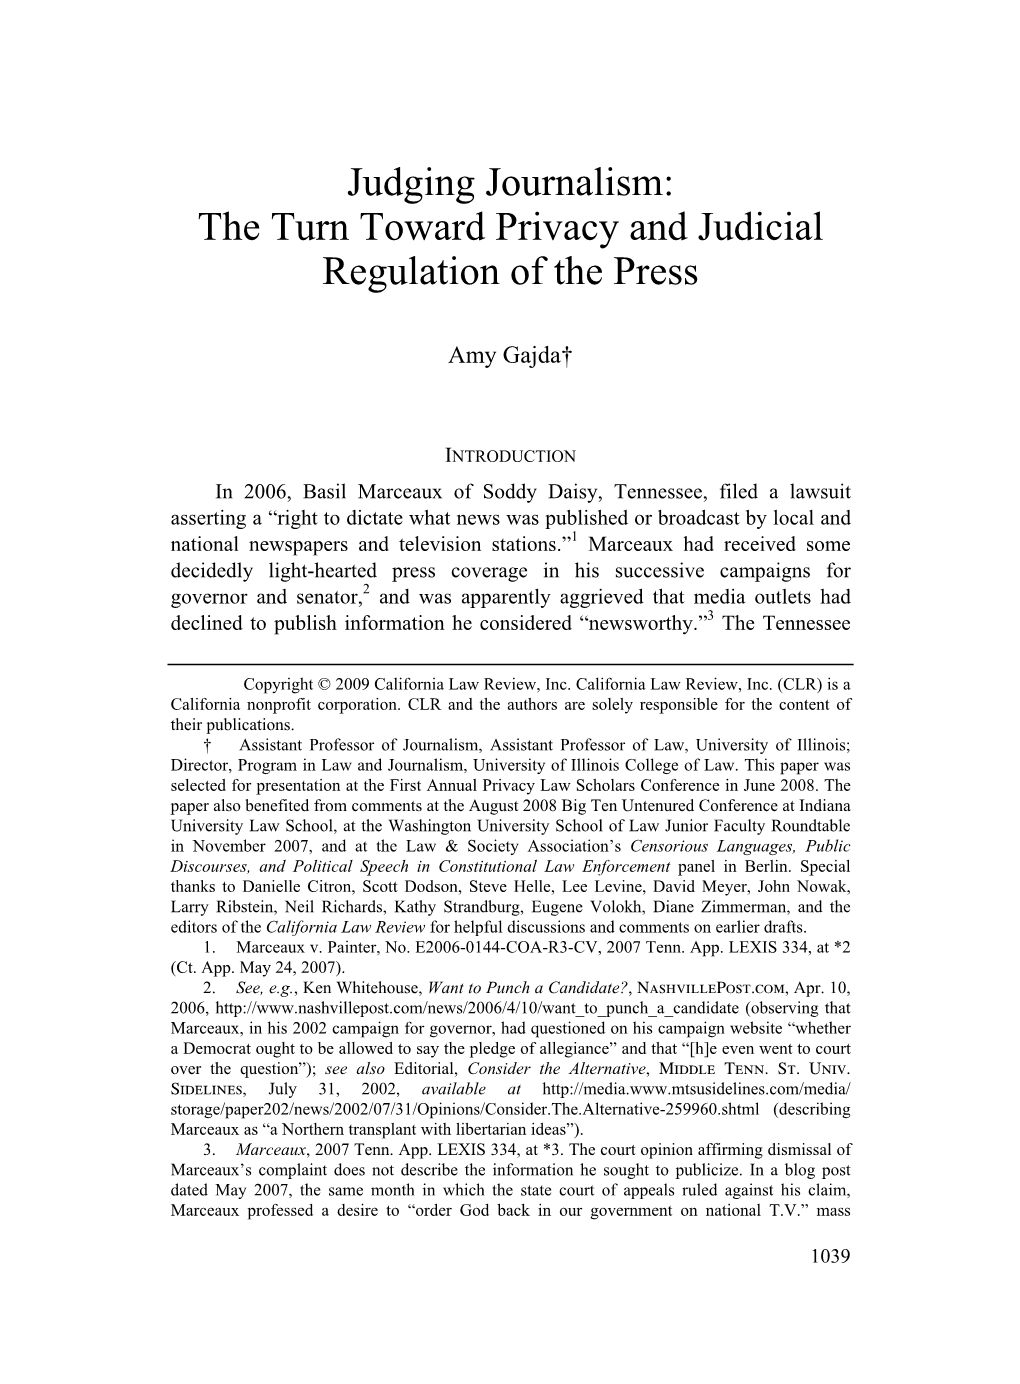 Judging Journalism: the Turn Toward Privacy and Judicial Regulation of the Press